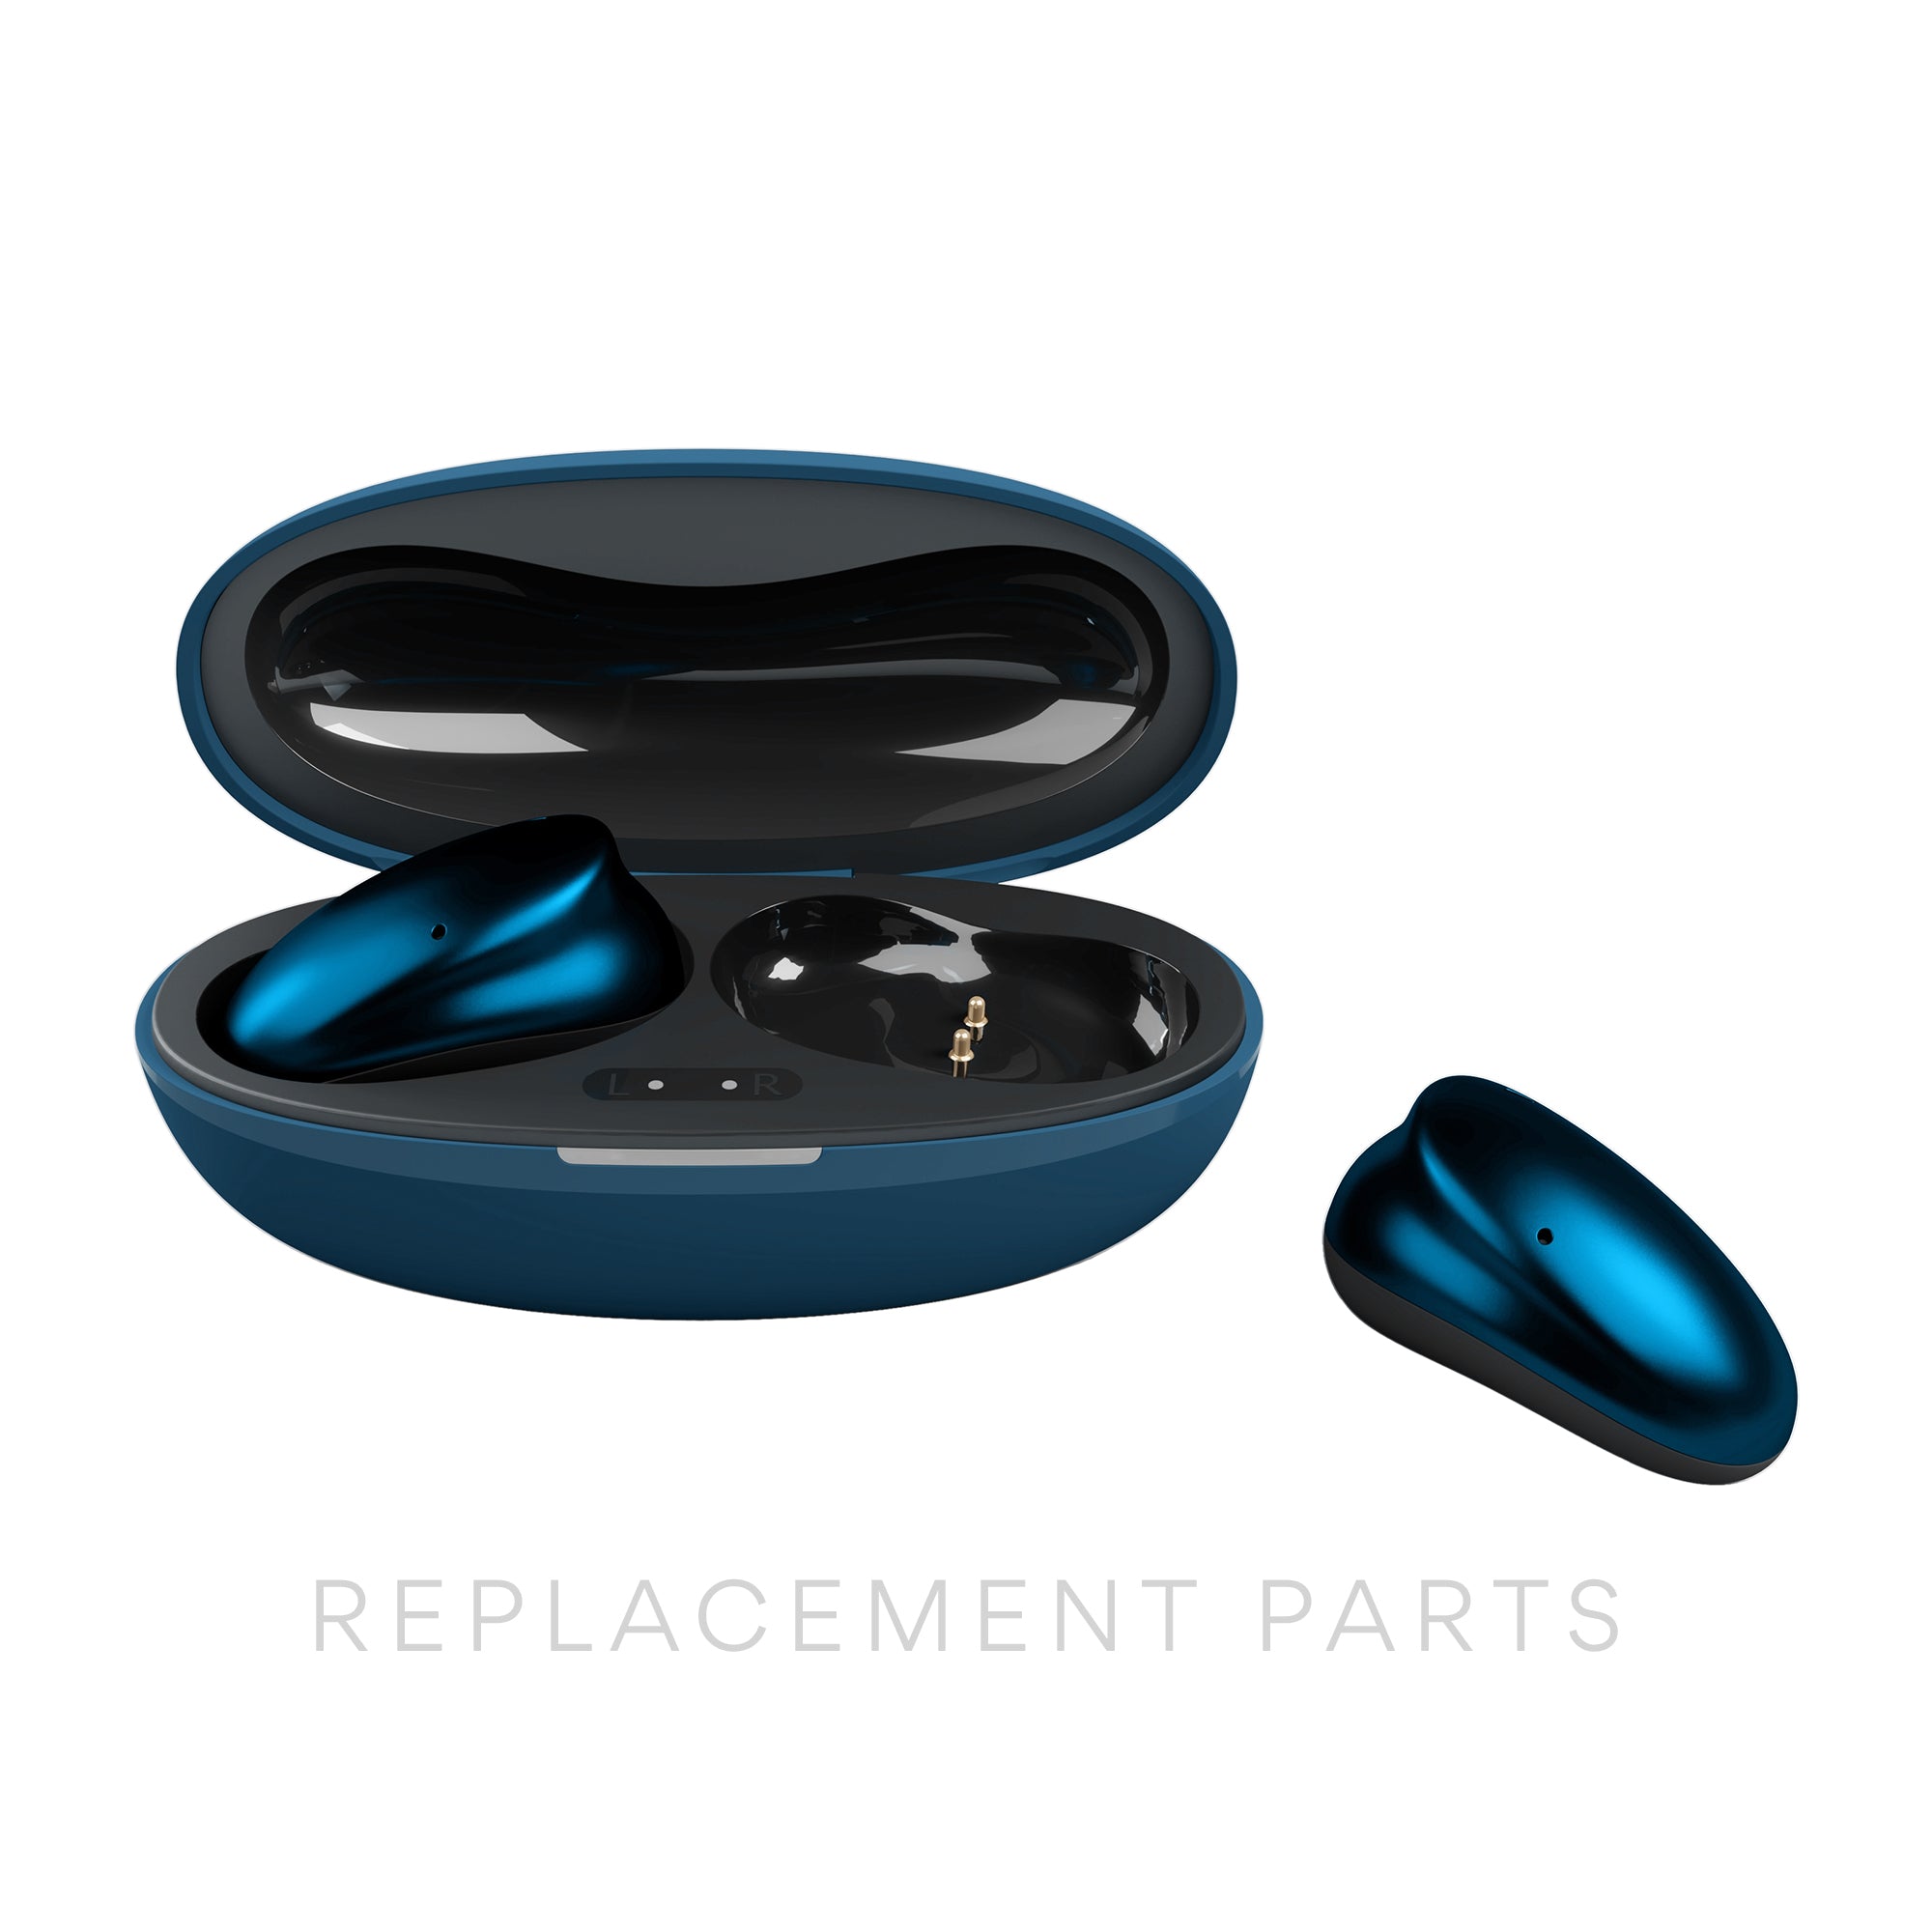 Replacement Parts for Pebbles True Wireless Earbuds